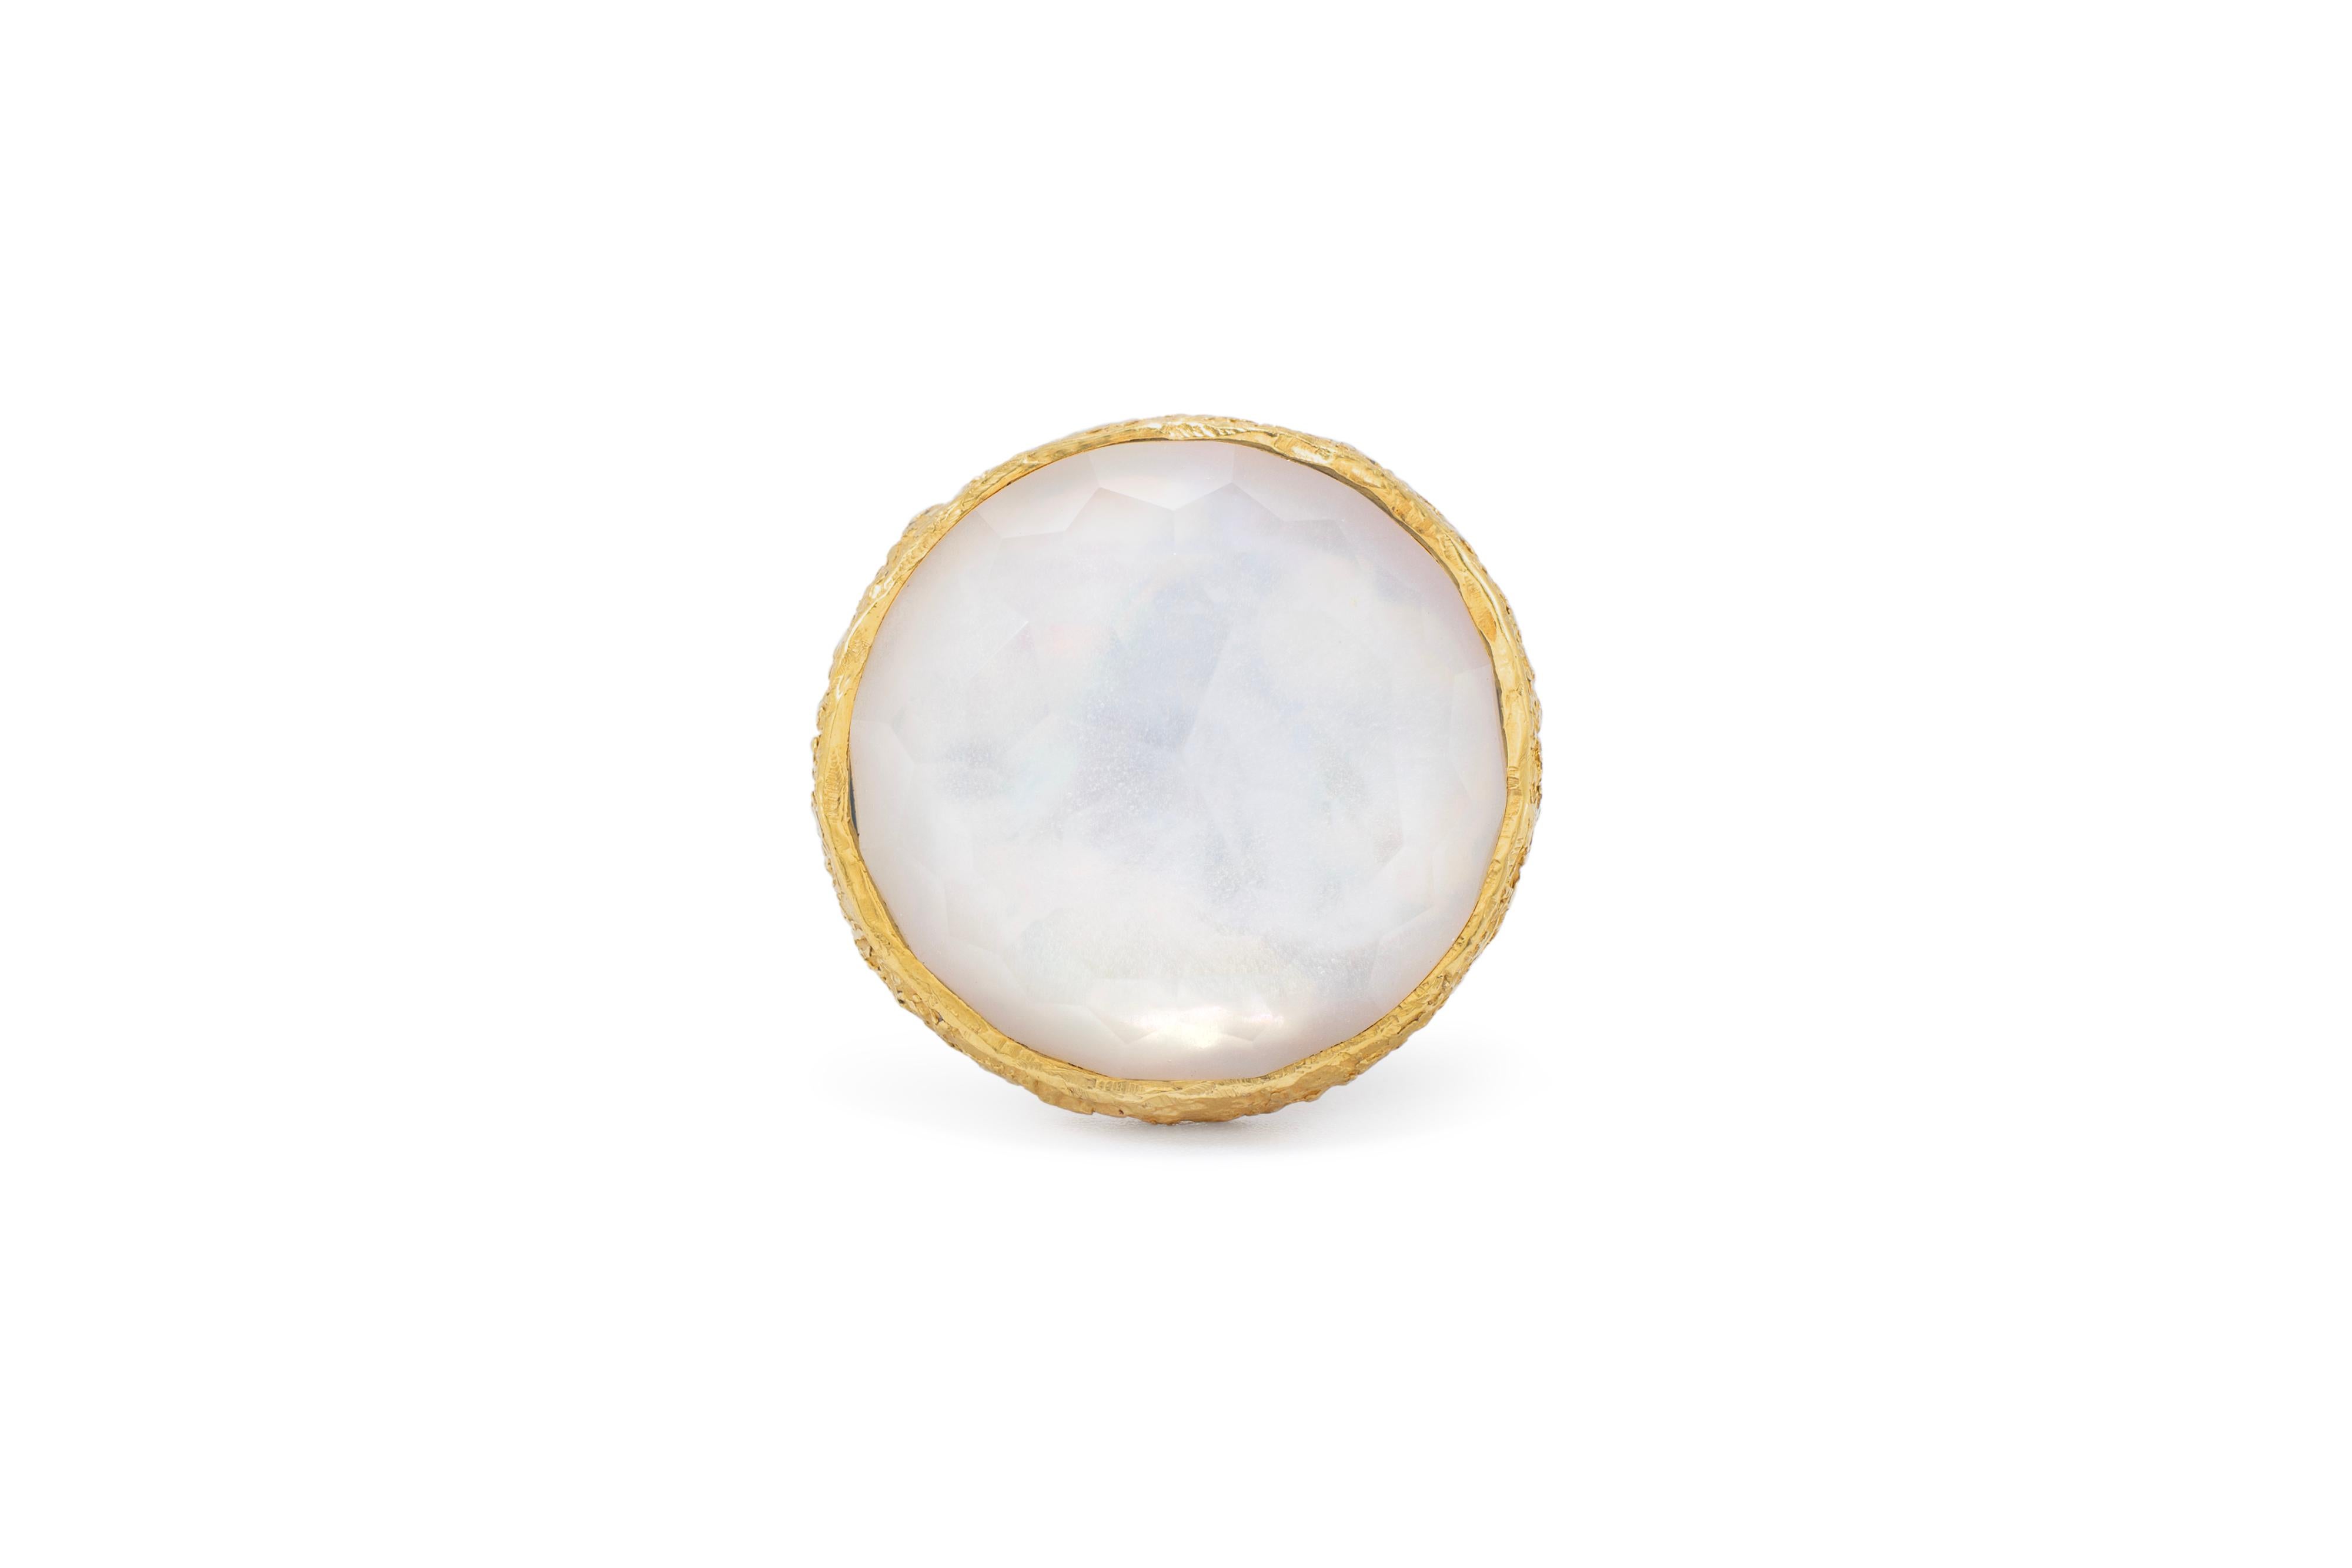 Angelic Pearl and Crystal Cocktail Ring in 22k Gold, by Tagili